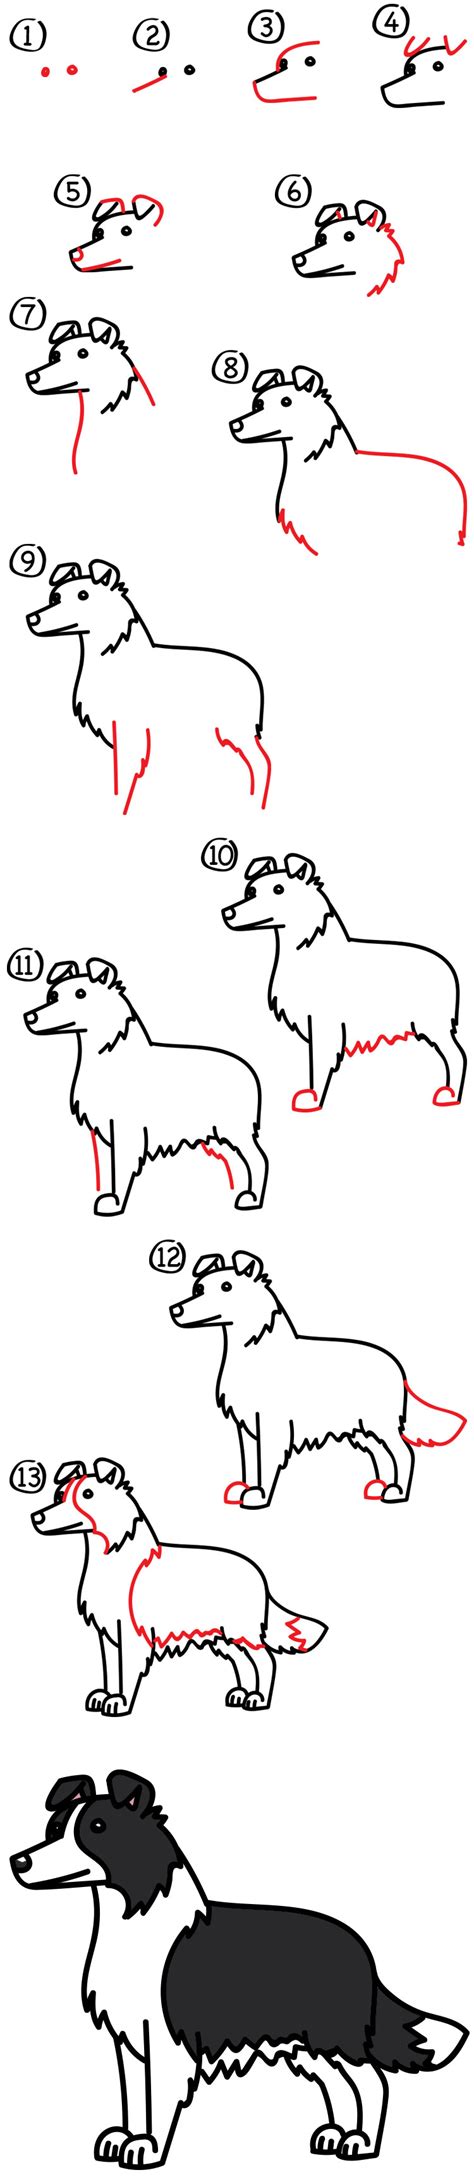 How to draw a Dog Step By Step Easily (35 Ideas)